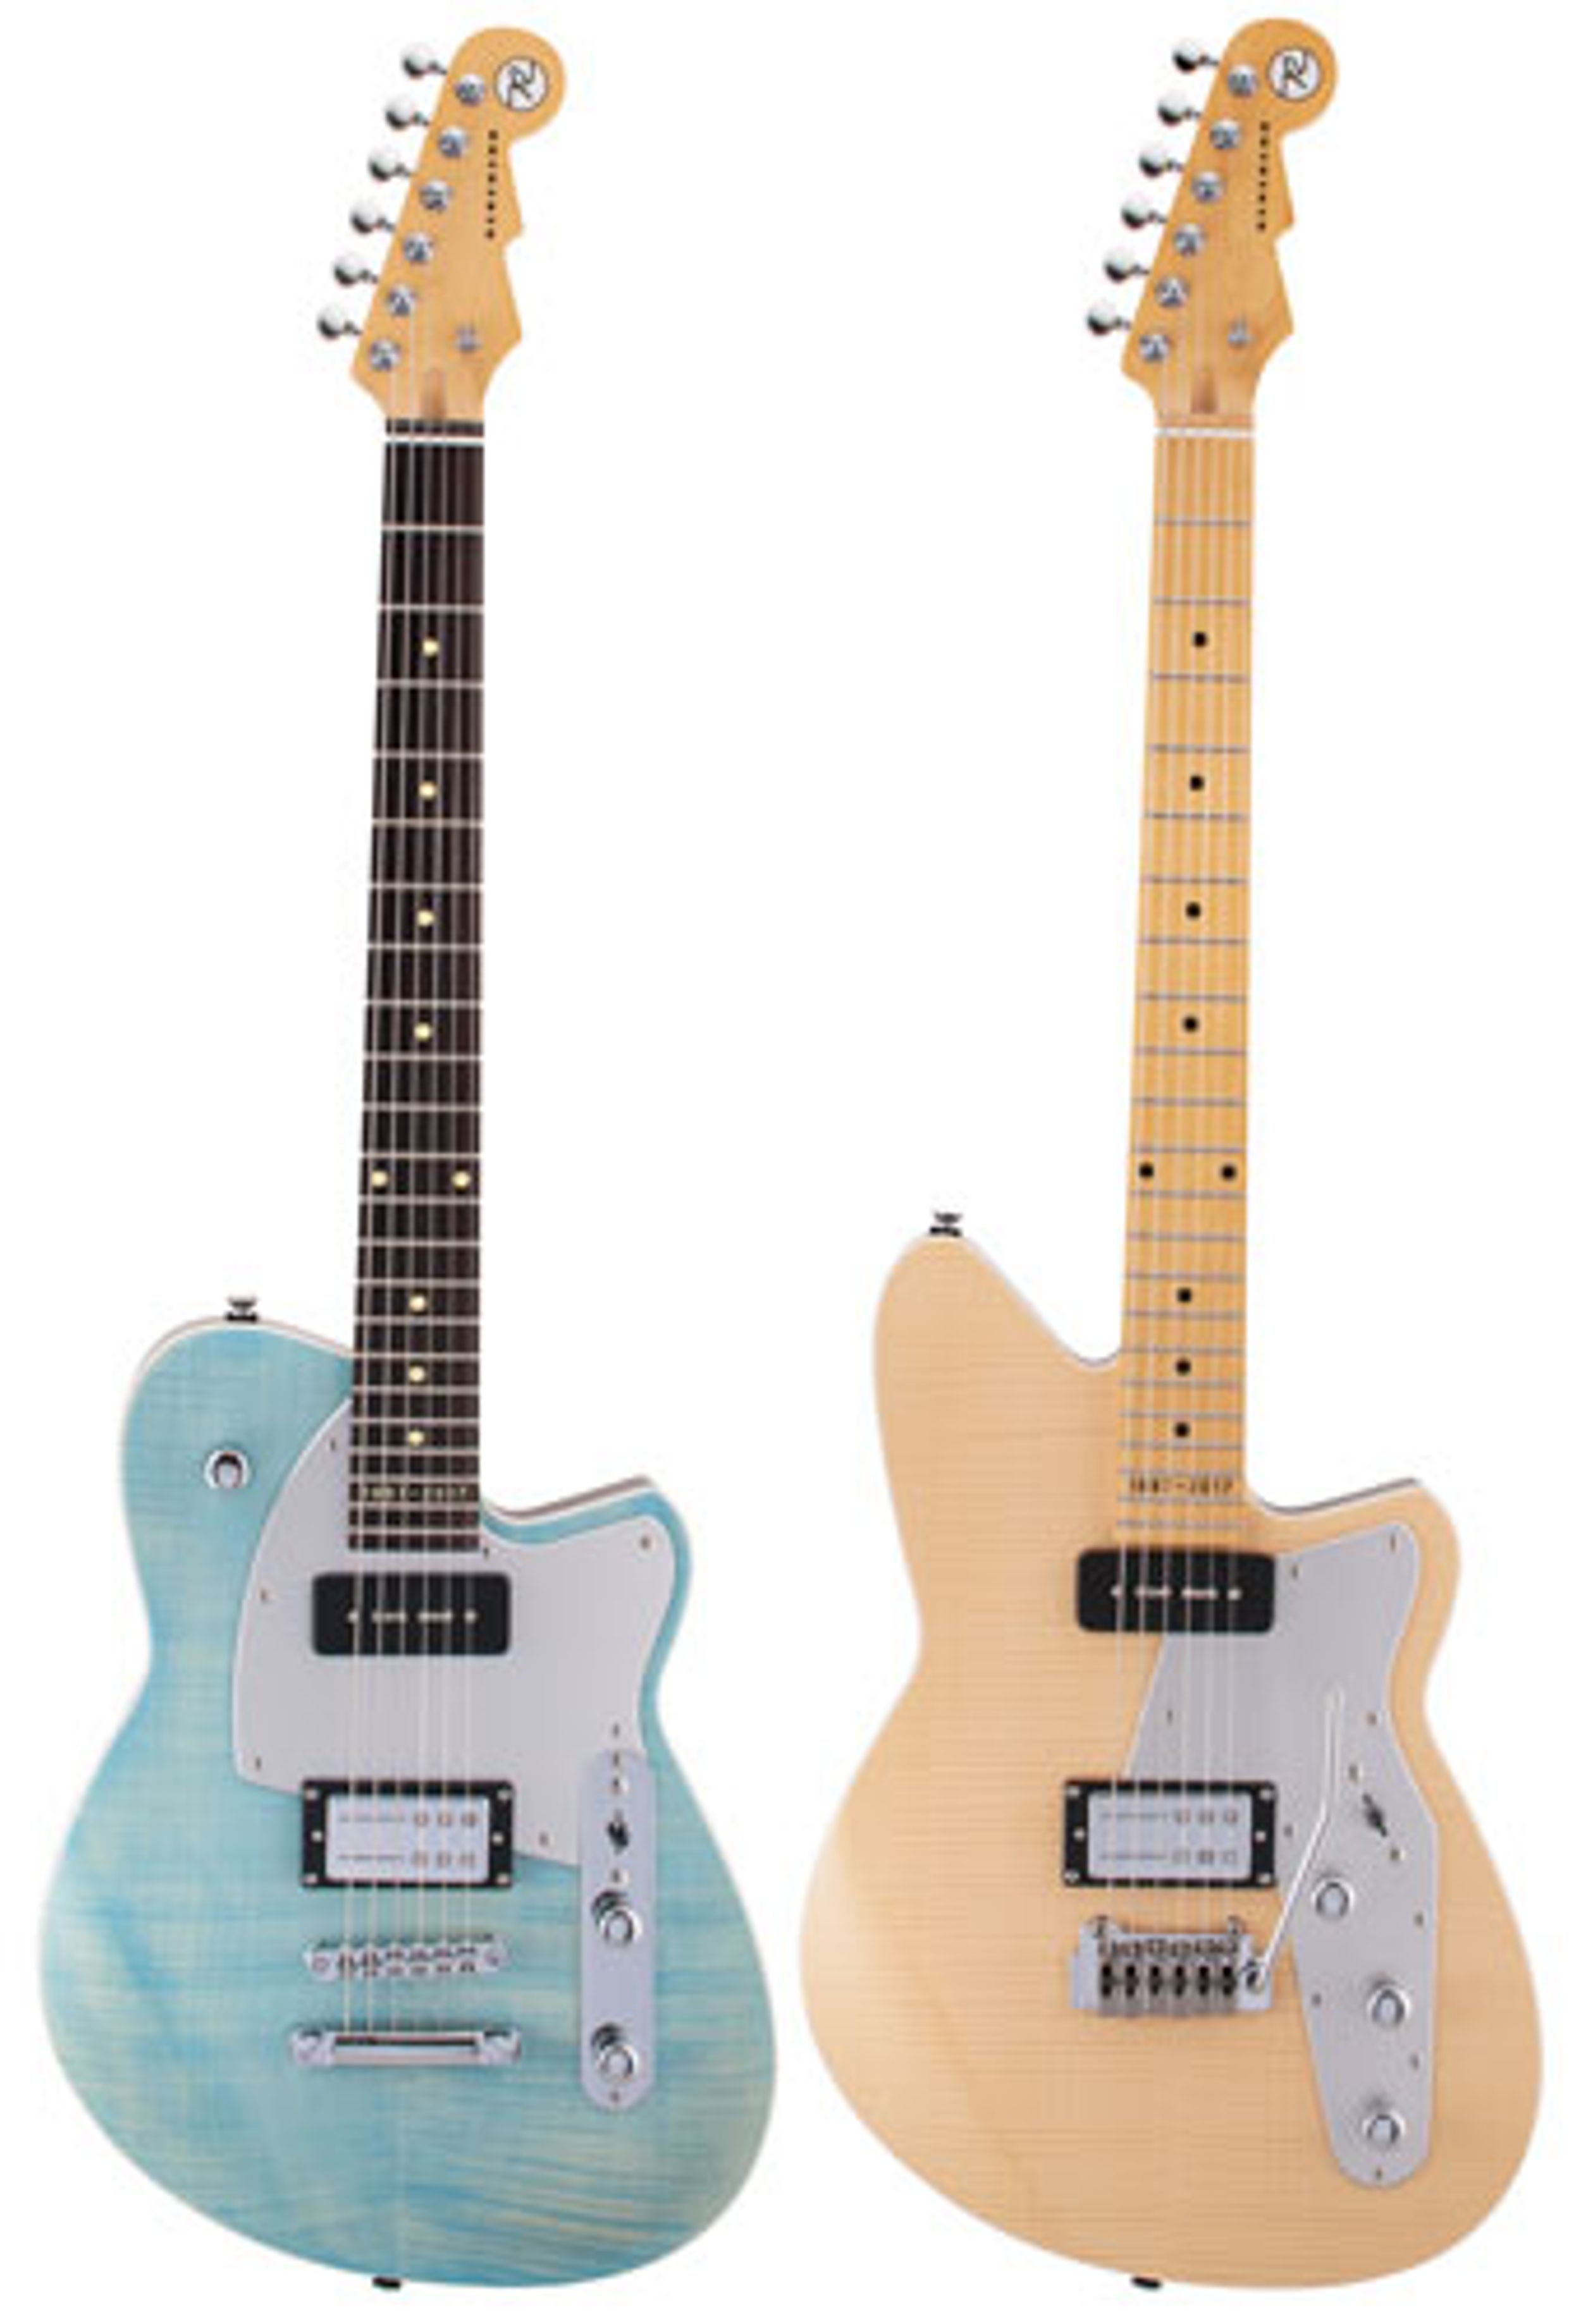 Reverend Celebrates 20th Anniversary with New Double Agent Models